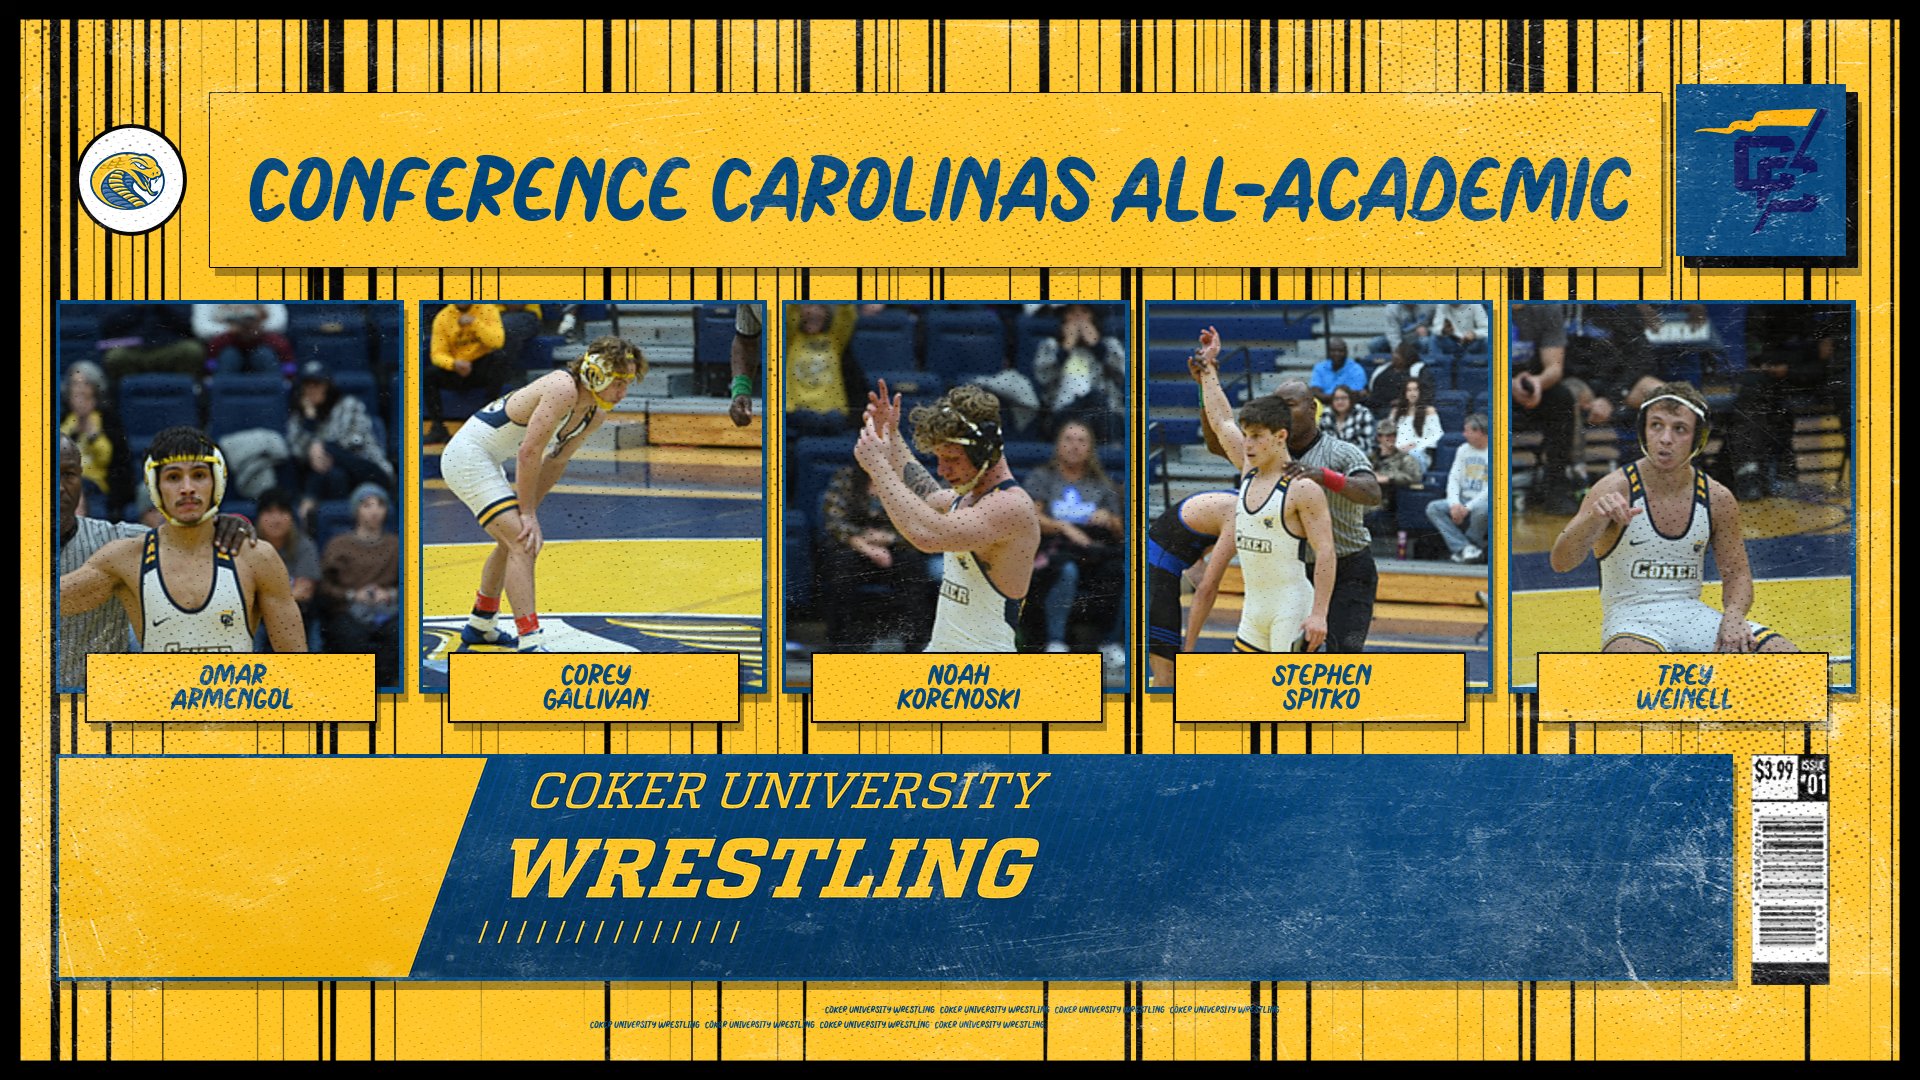 Five Cobras Named to the Conference Carolinas Winter/Spring Academic All-Conference Teams